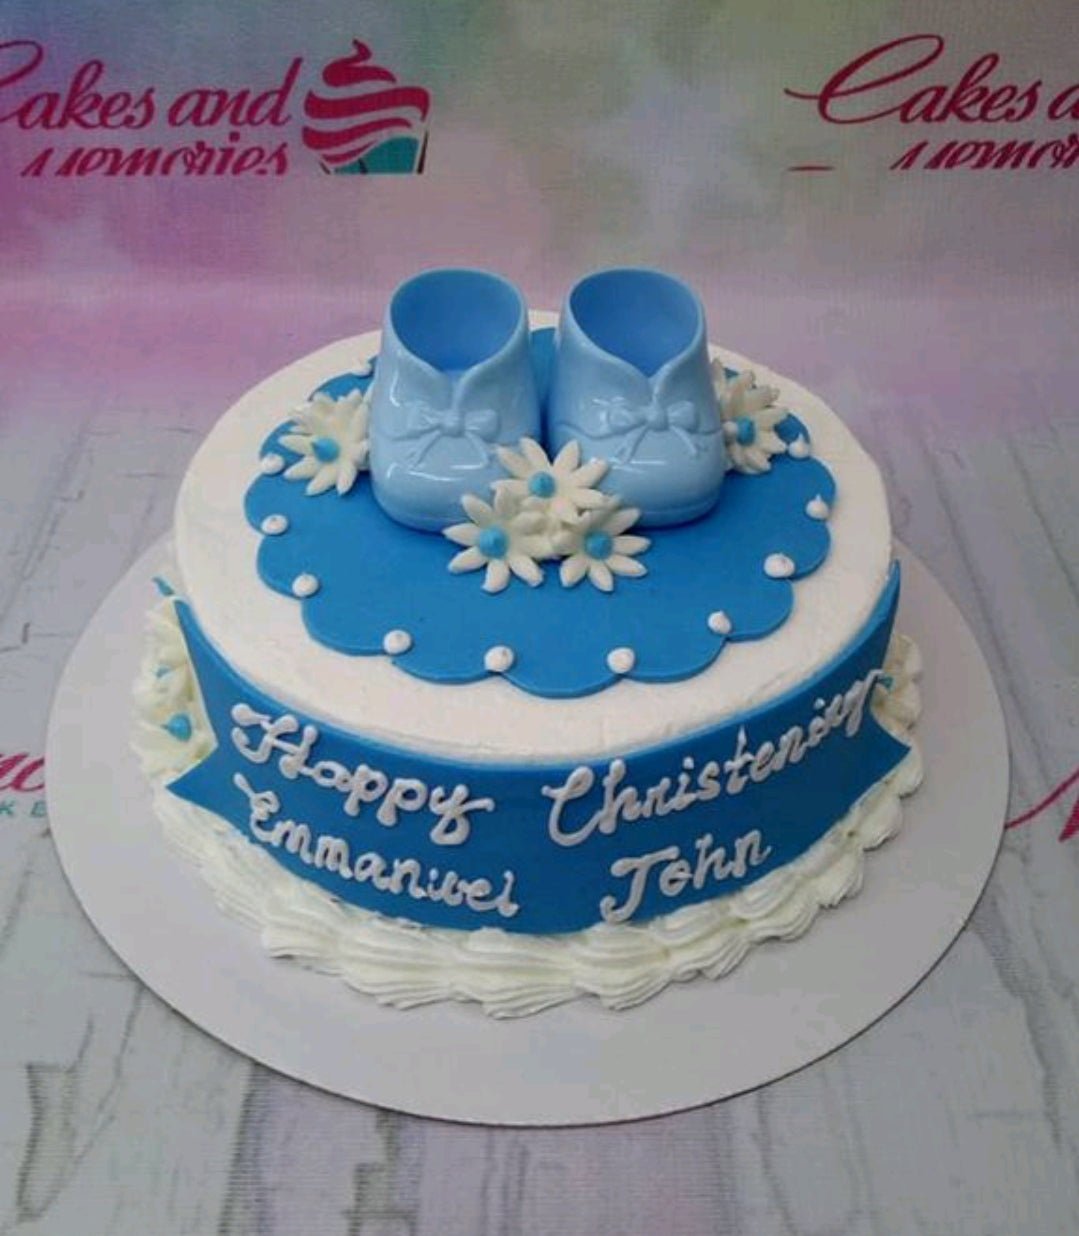 Christening cakes – Just Yummy – Gluten Free Bakers